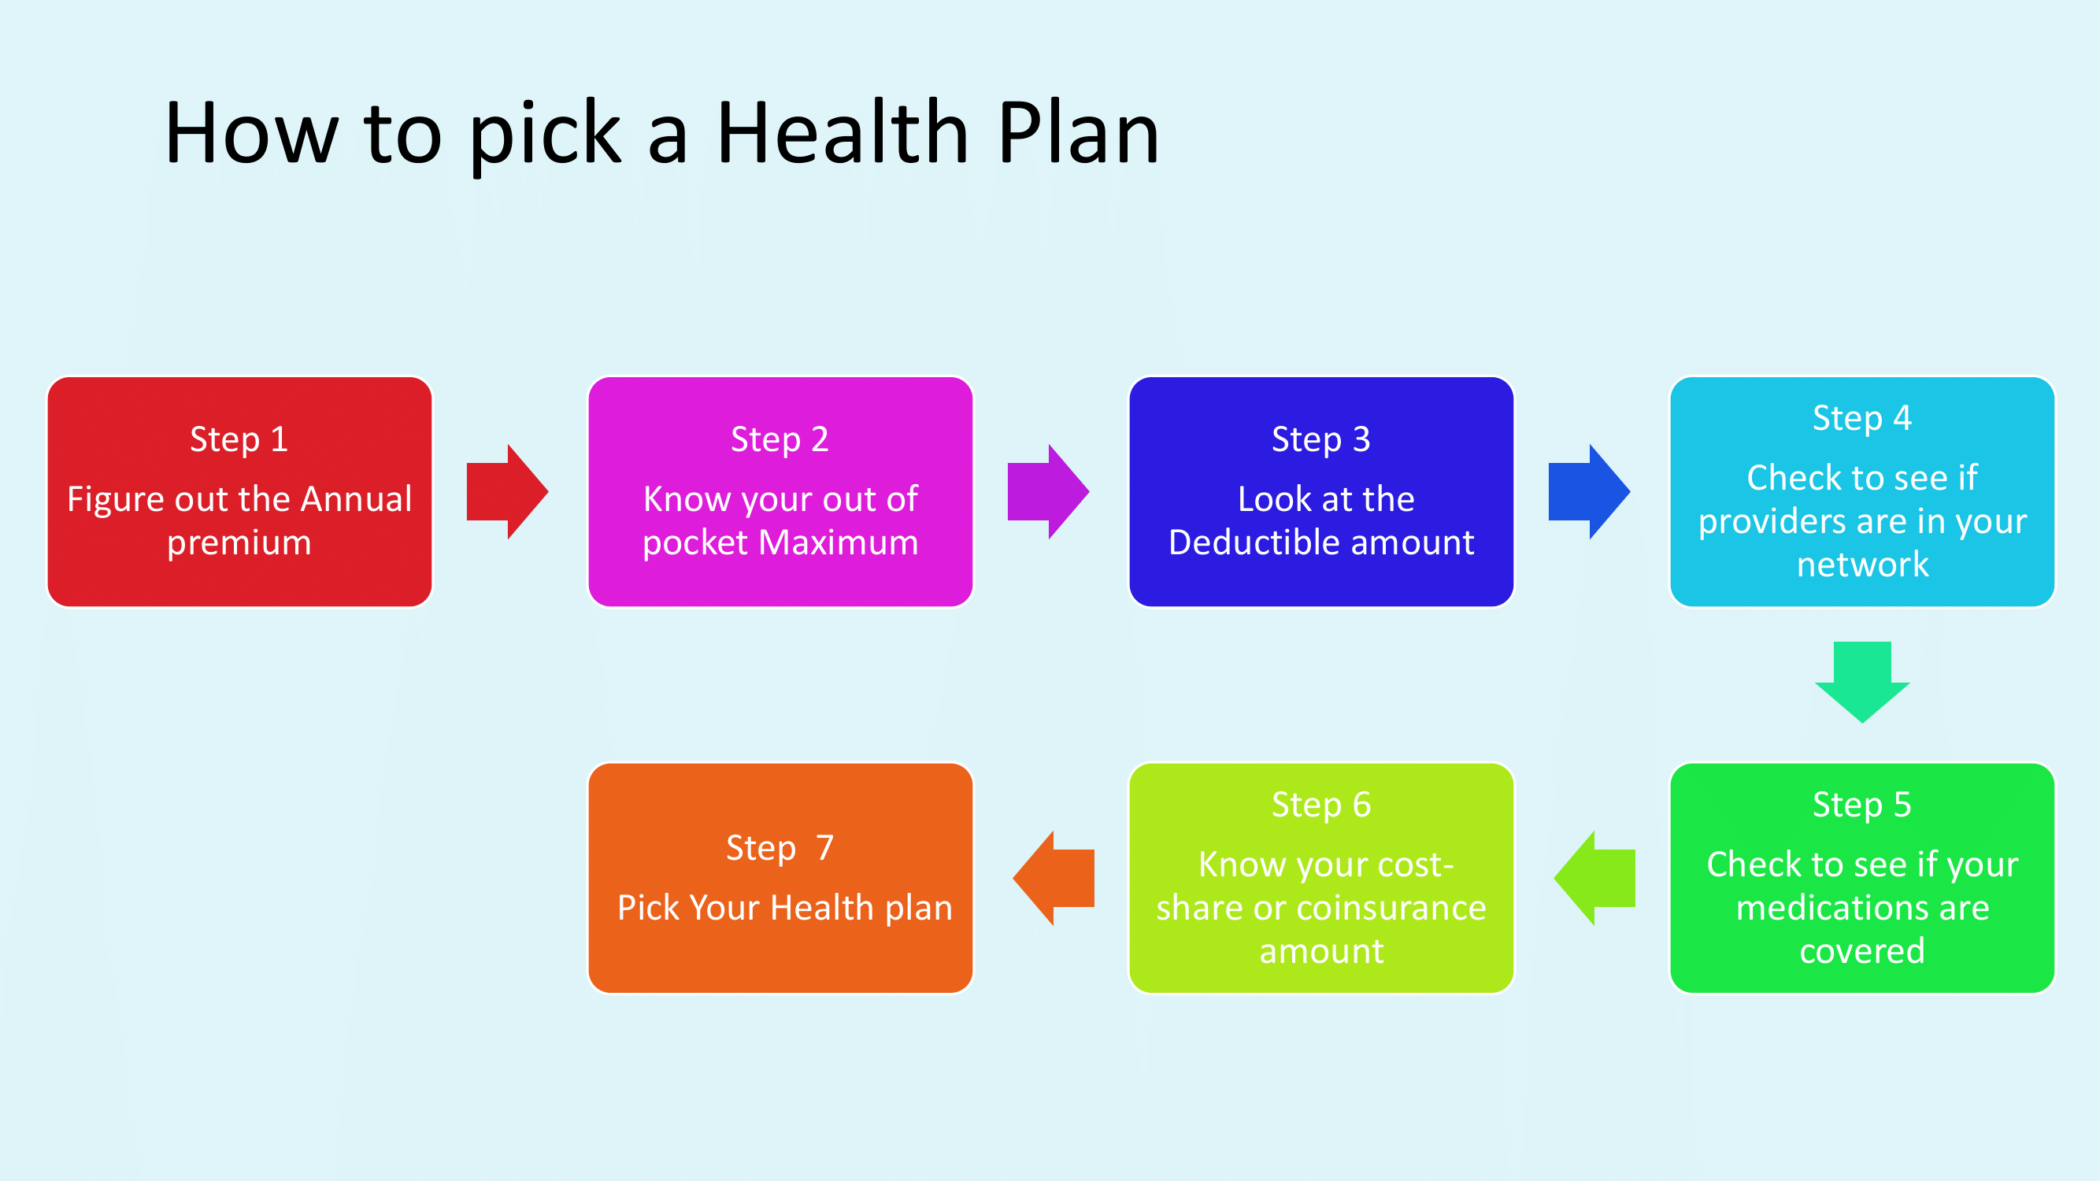 How to pick a health plan flow chart